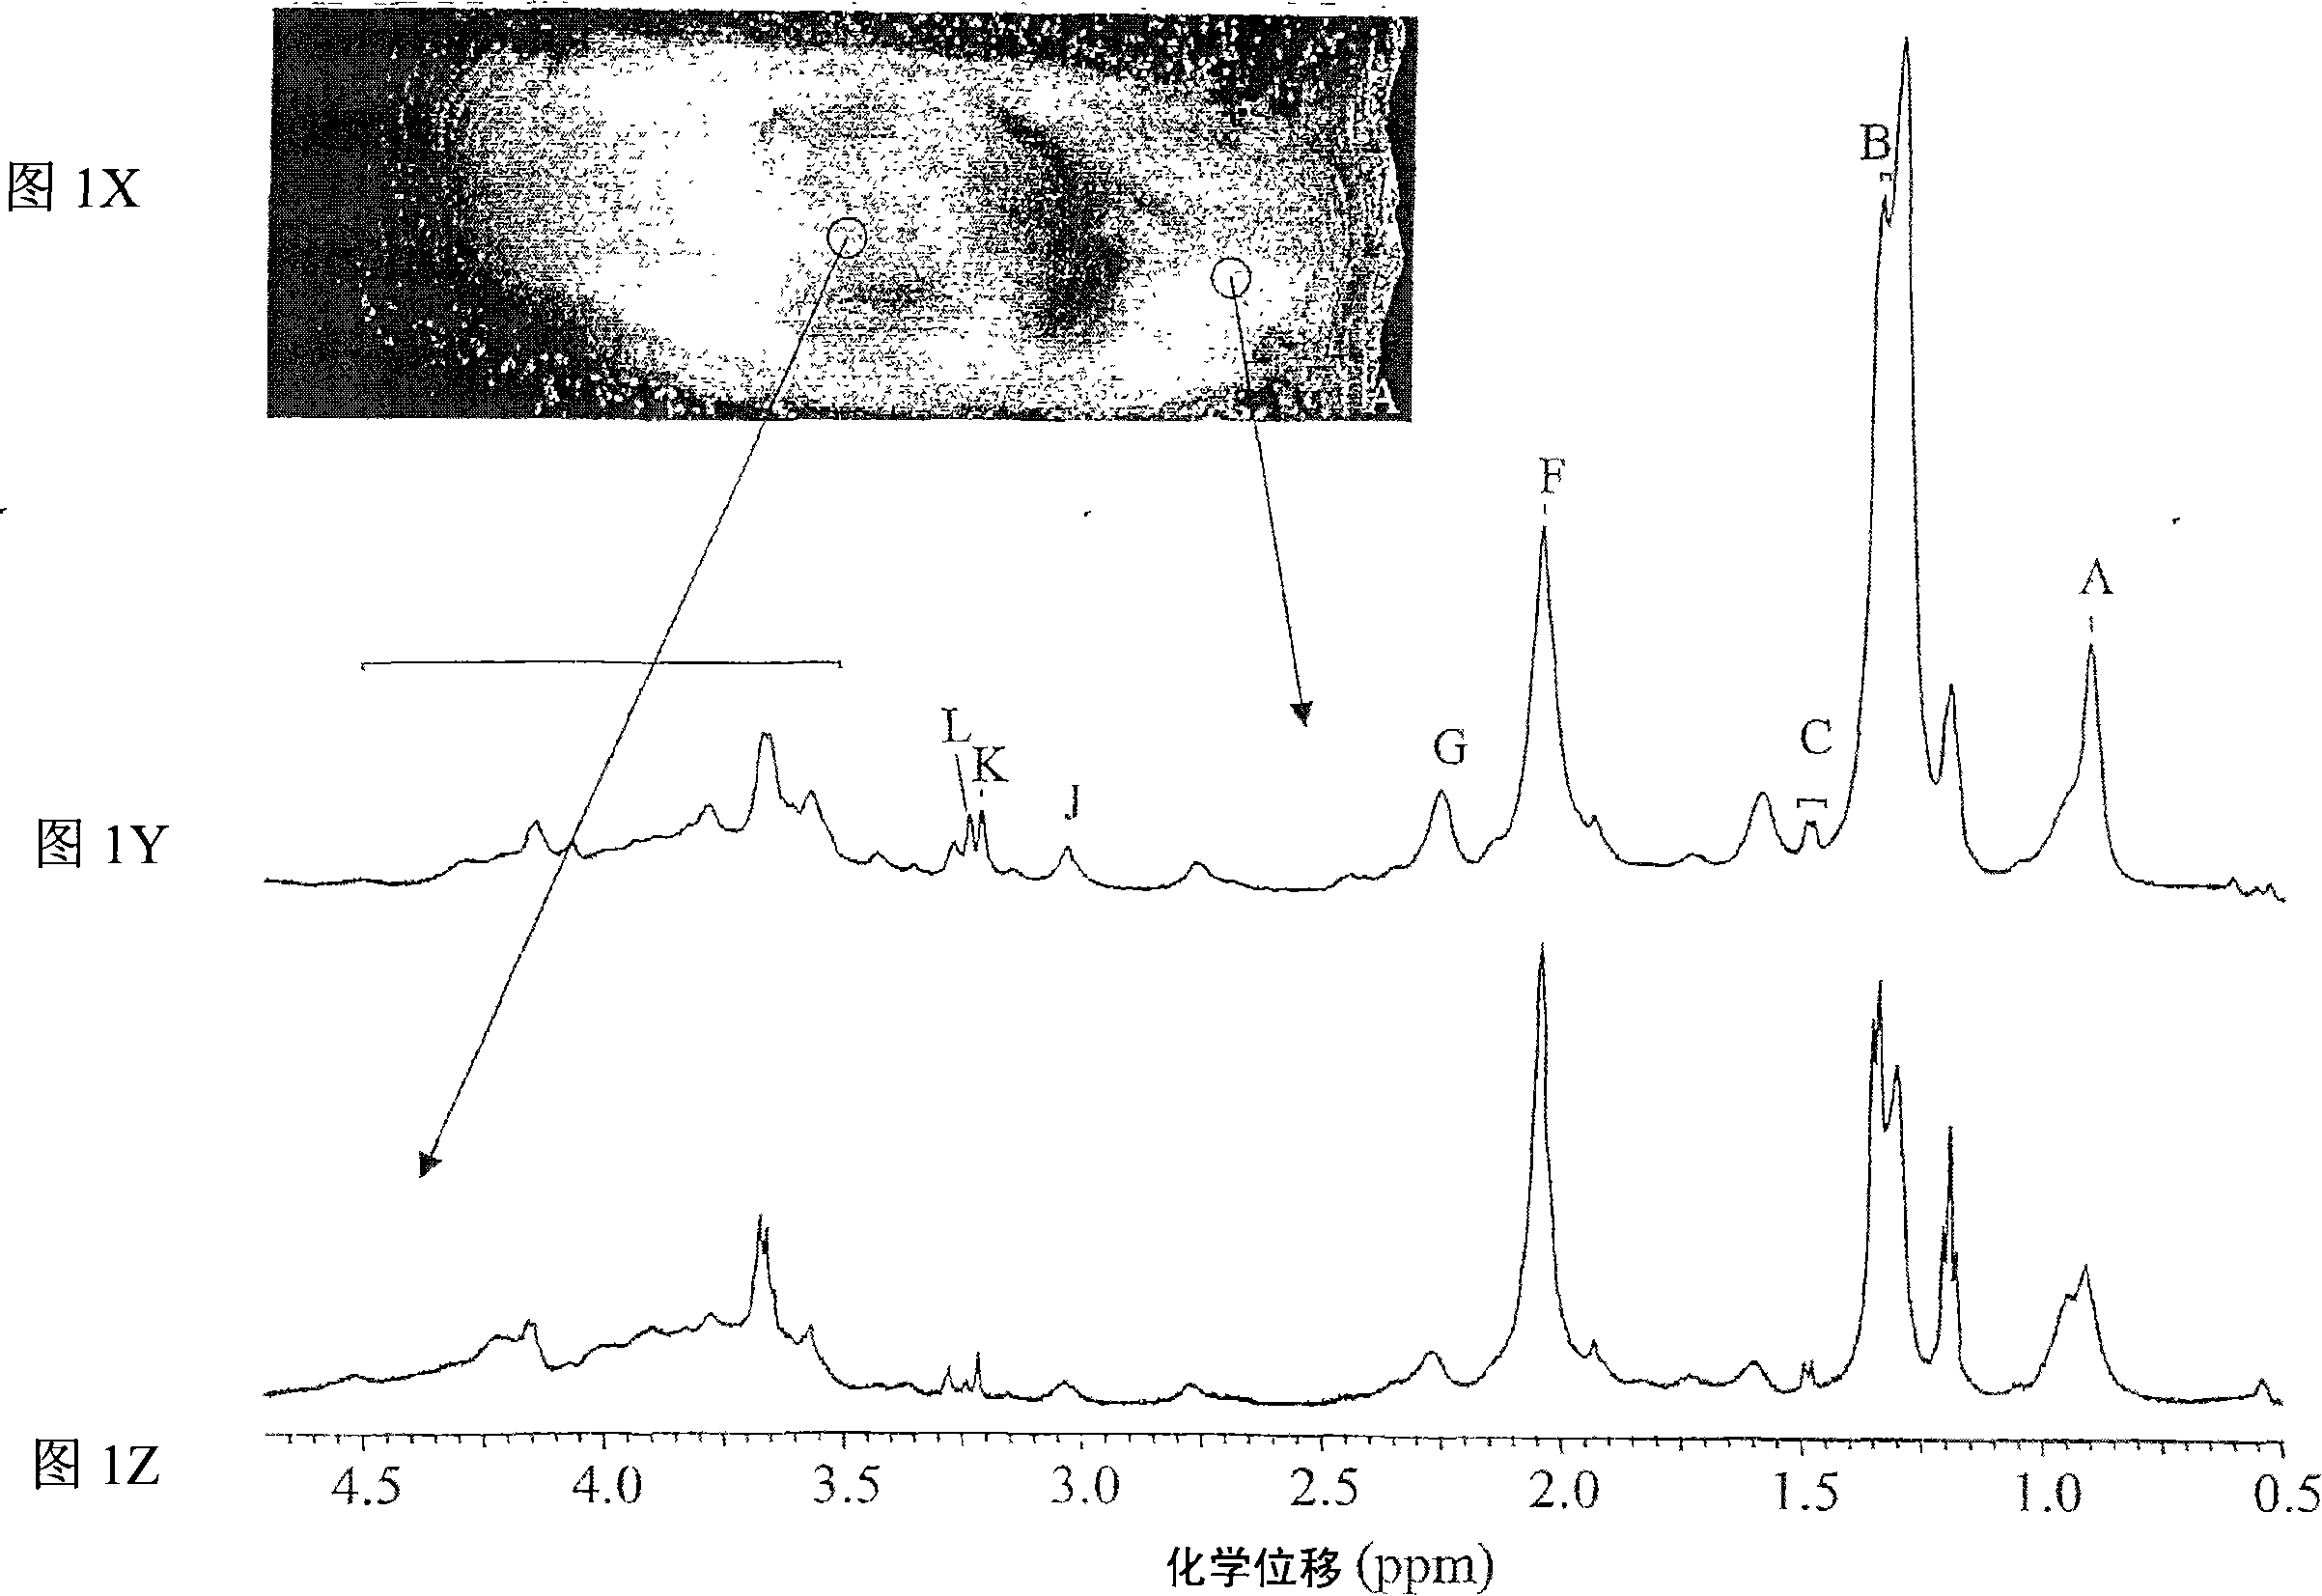 Systems and methods using nuclear magnetic resonance (NMR) spectroscopy to evaluate pain and degenerative properties of tissue